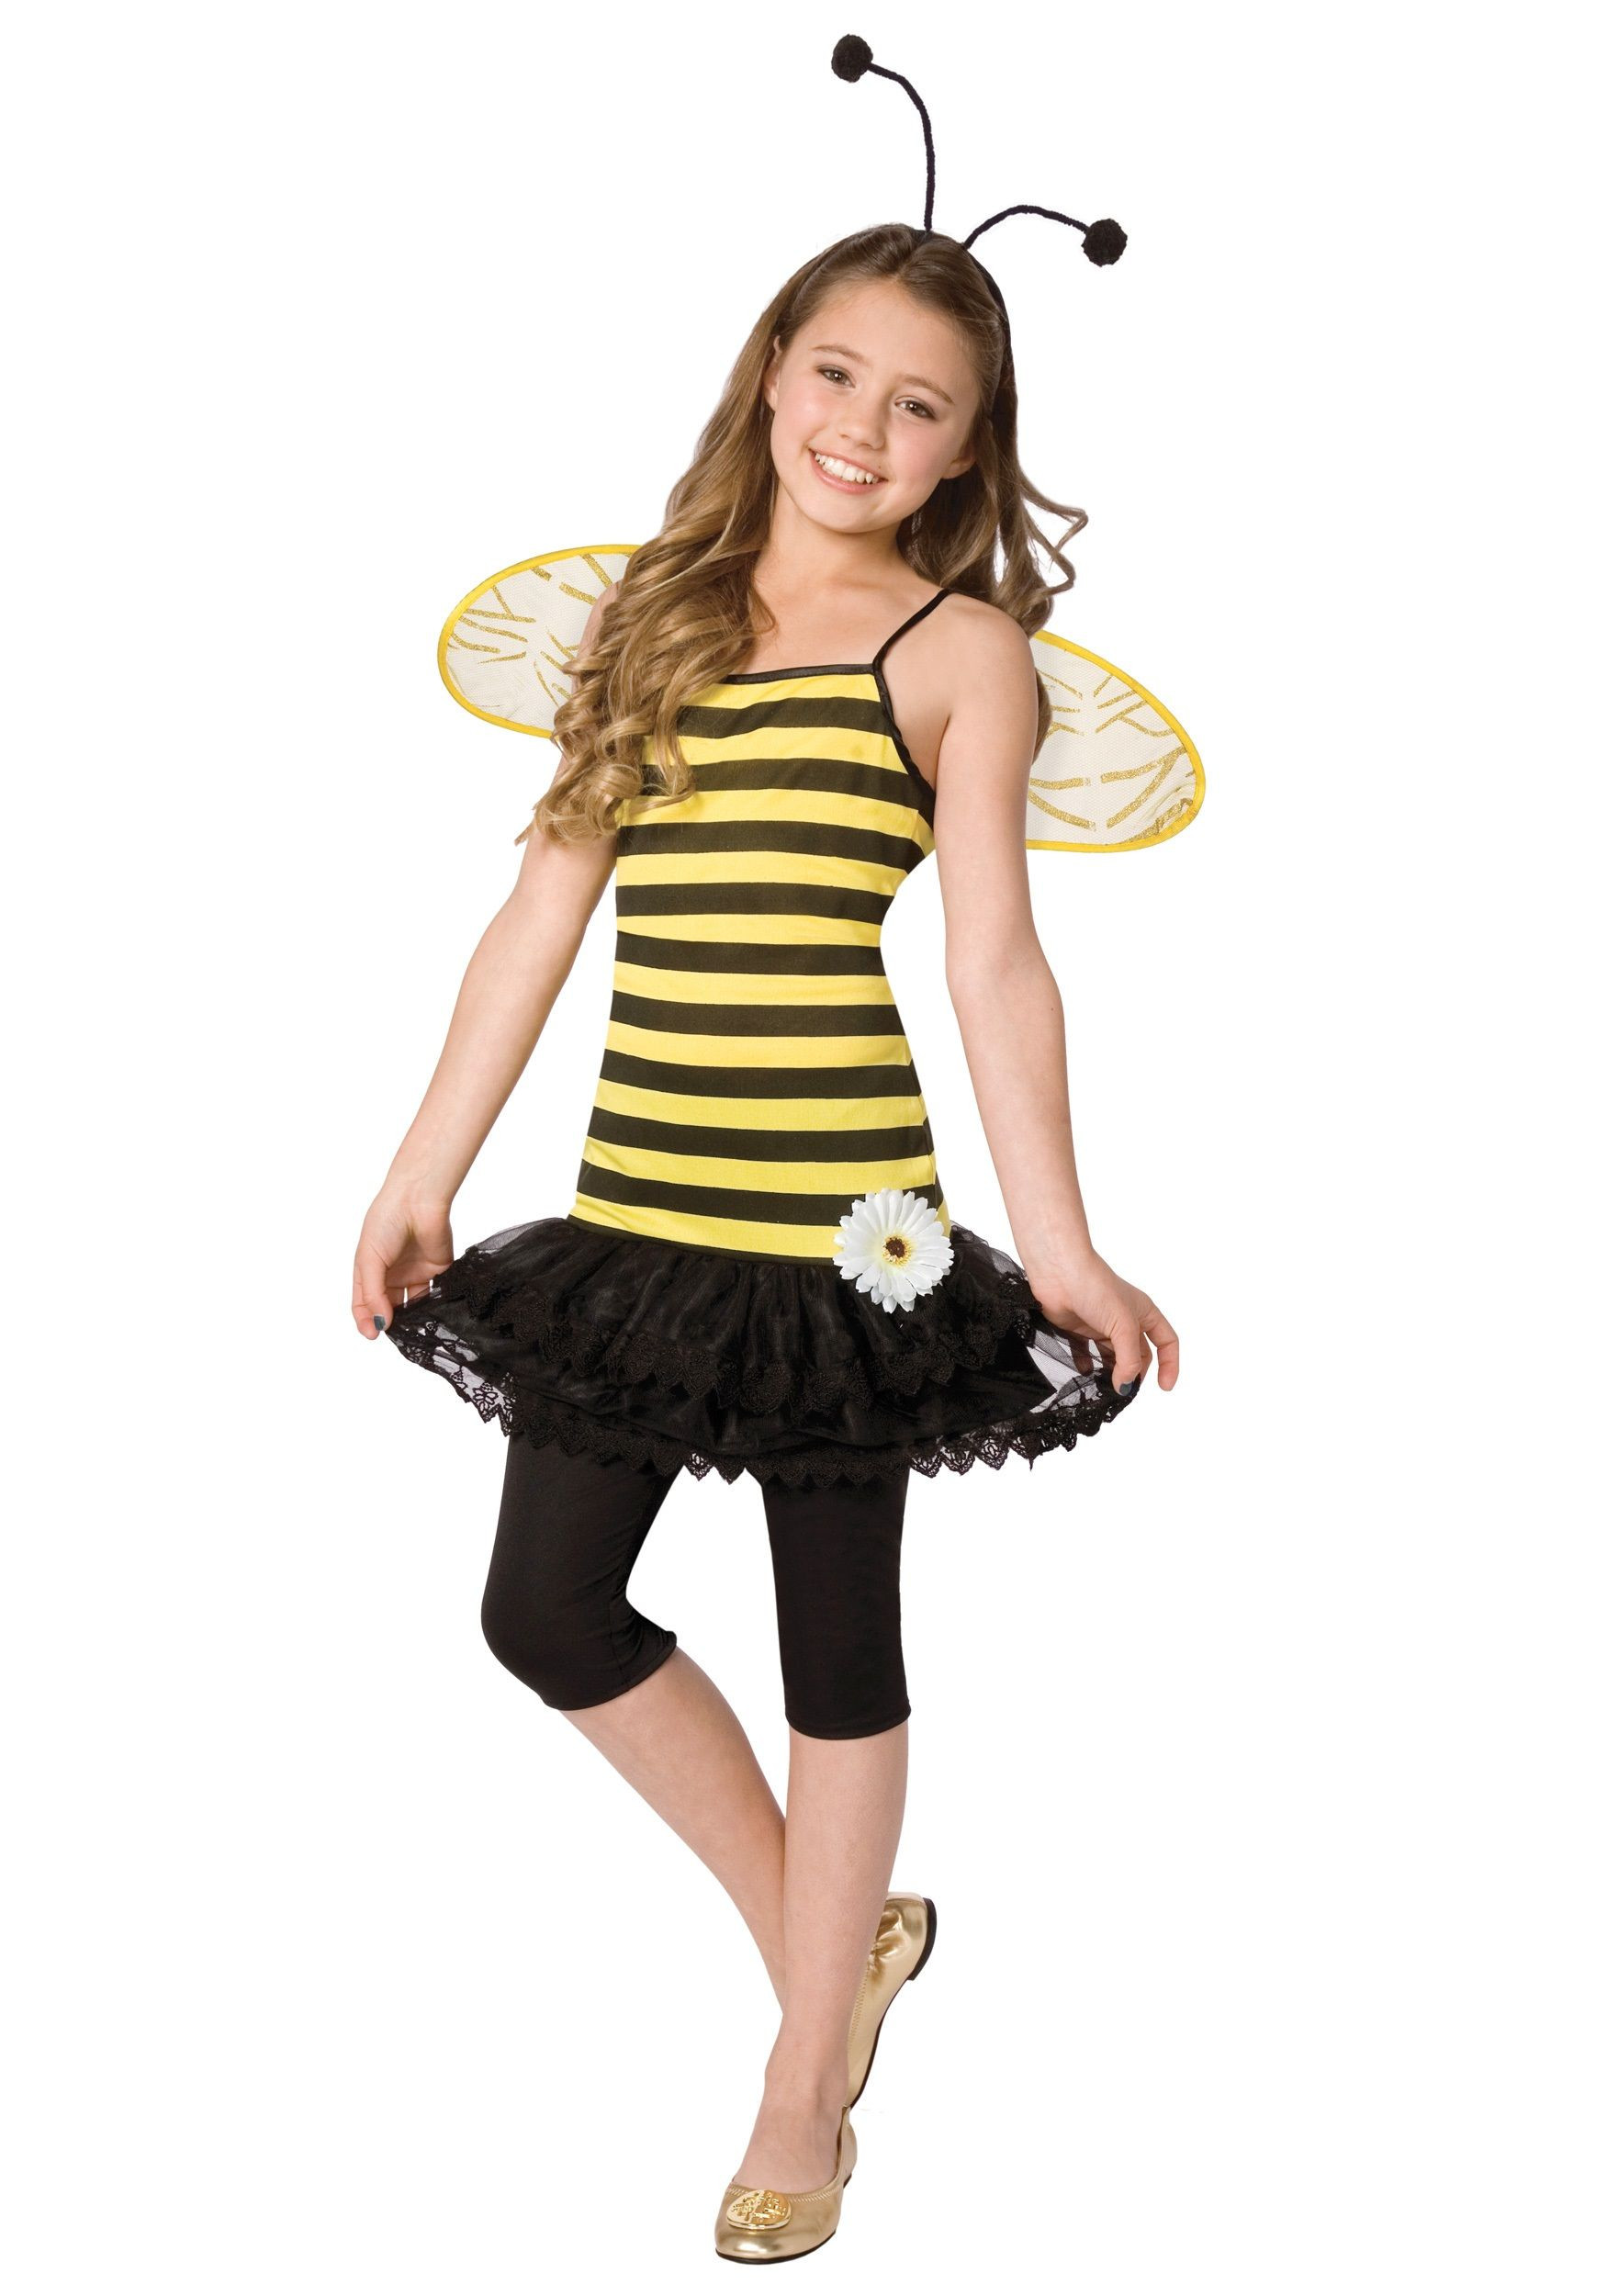 DIY Costumes For Tweens
 What i am being for Halloween